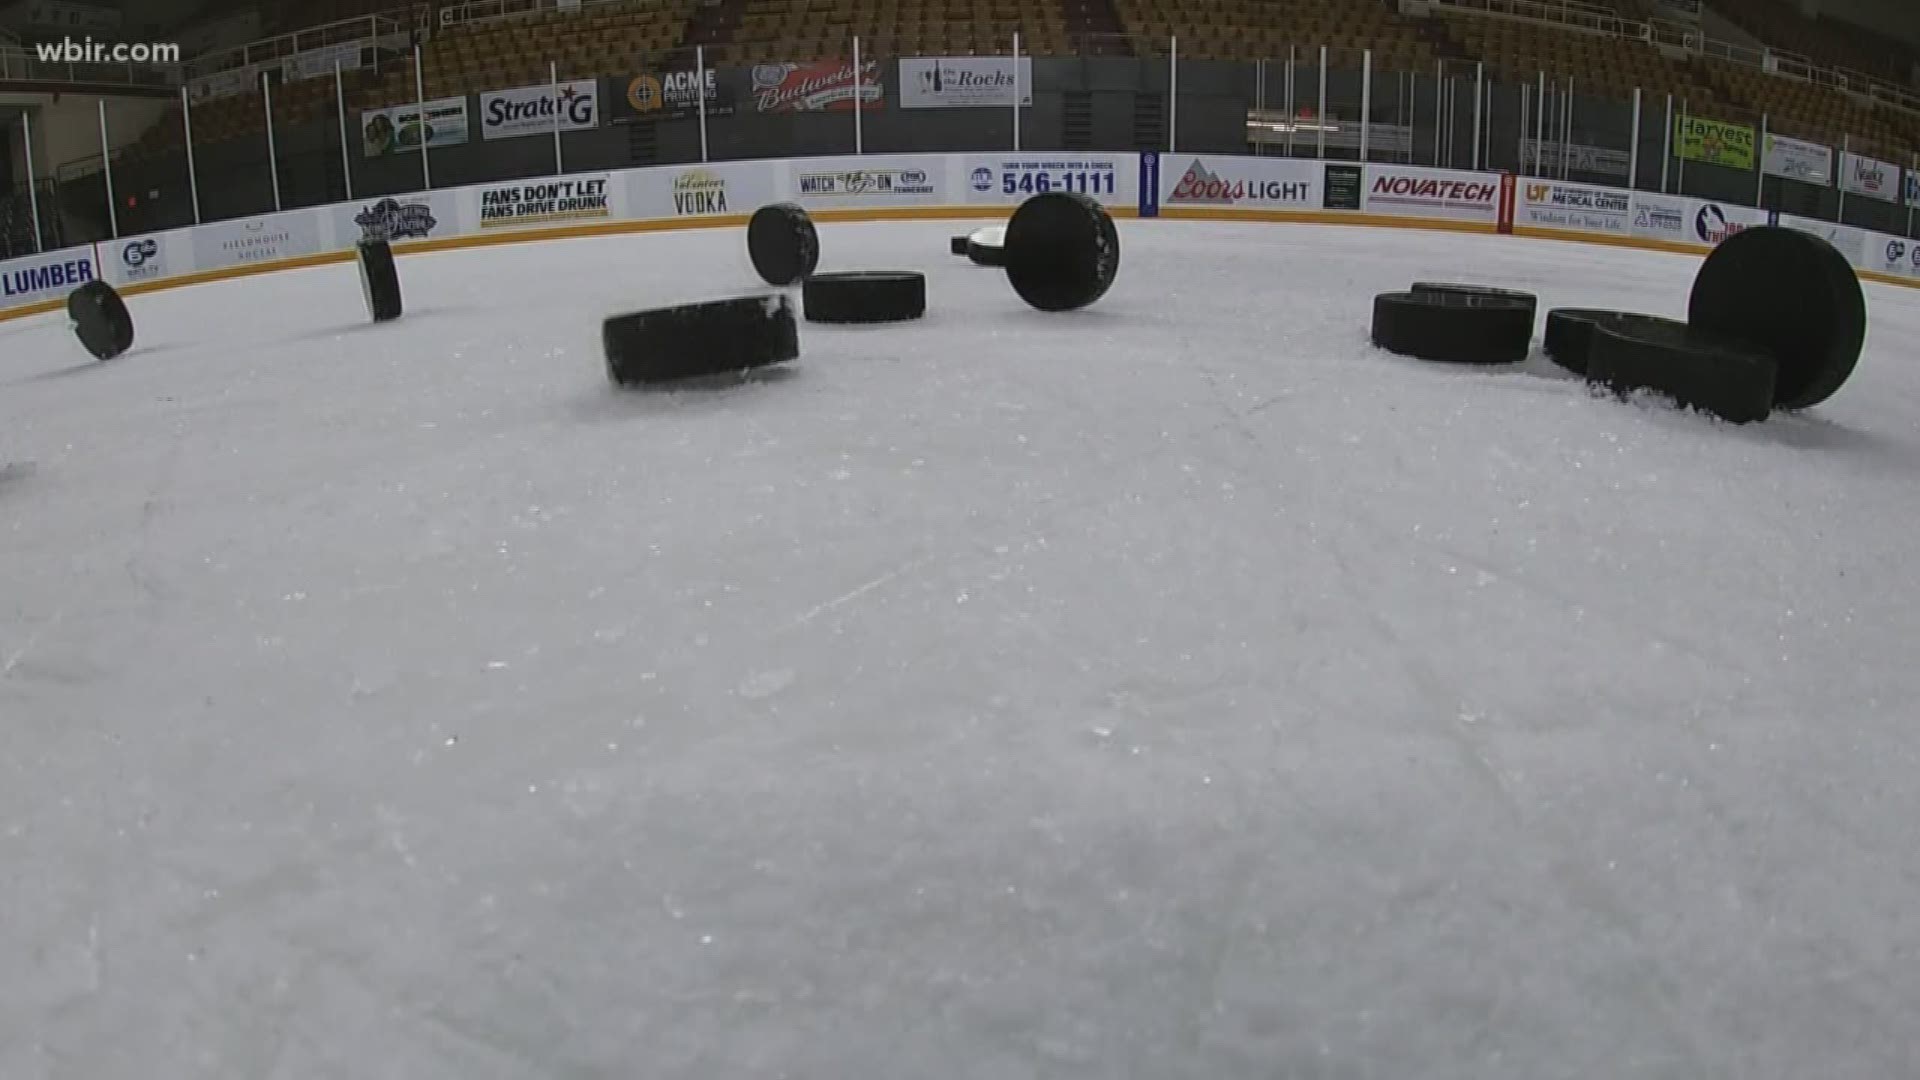 10Sports Anchor Patrick Murray shoots some pucks at the Civic Coliseum with Ice Bears leading scorer Anthony McVeigh.